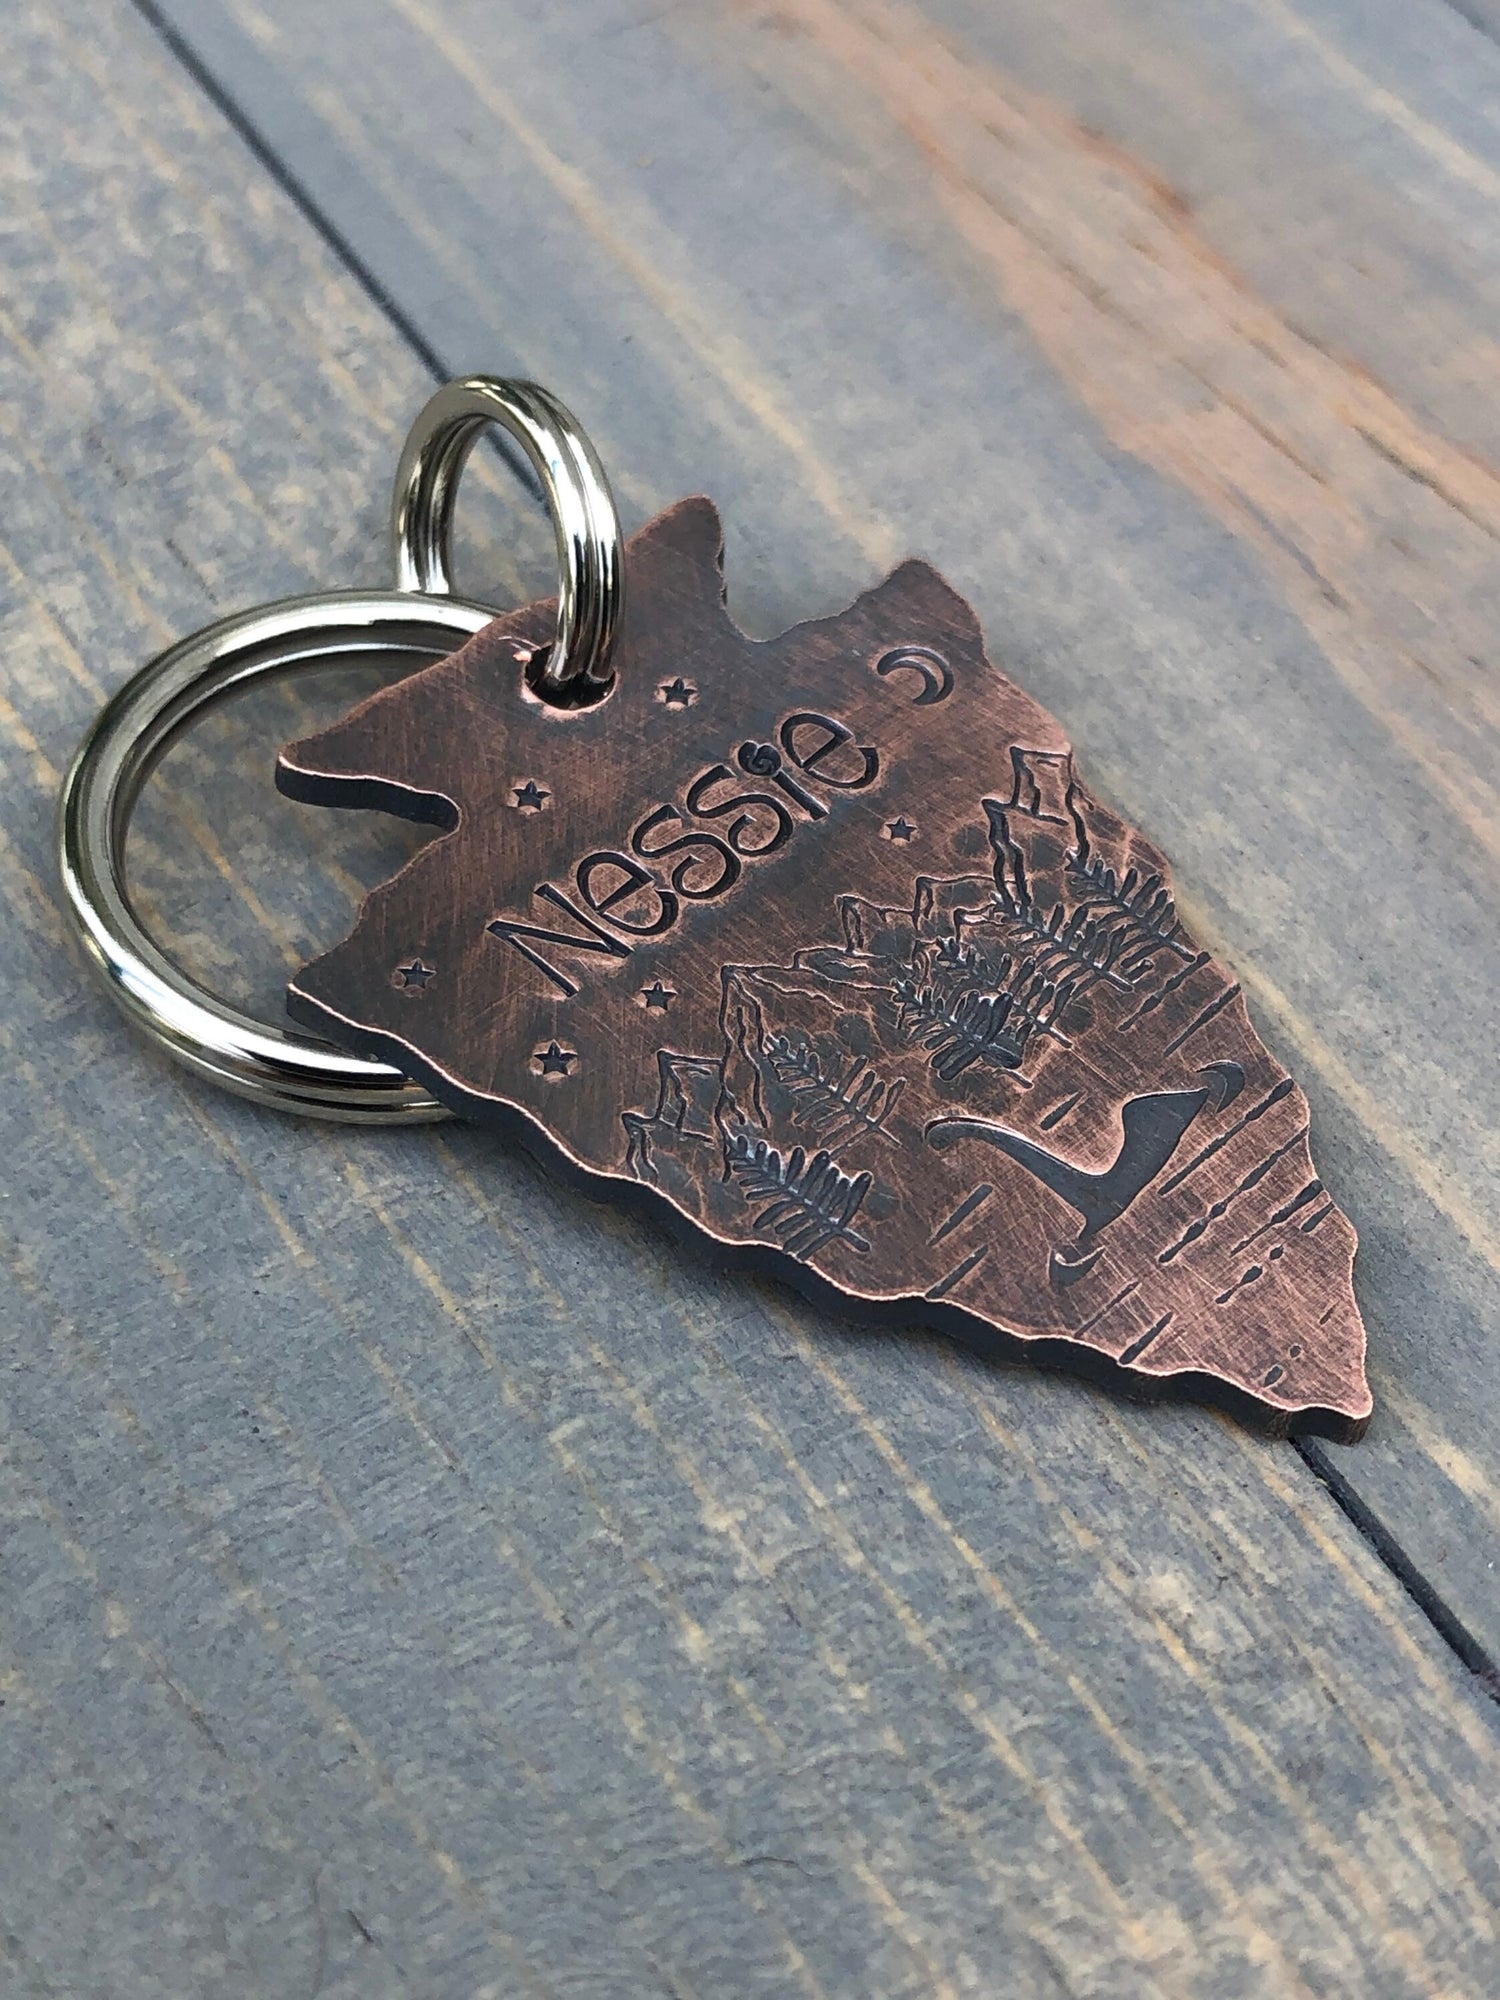 Lock Ness Monster Arrowhead Dog Tag, Hand Stamped Pet ID, Nessie Dog ID Tag, Personalized Dog Tag for Dog, Arrowhead Dog Tag